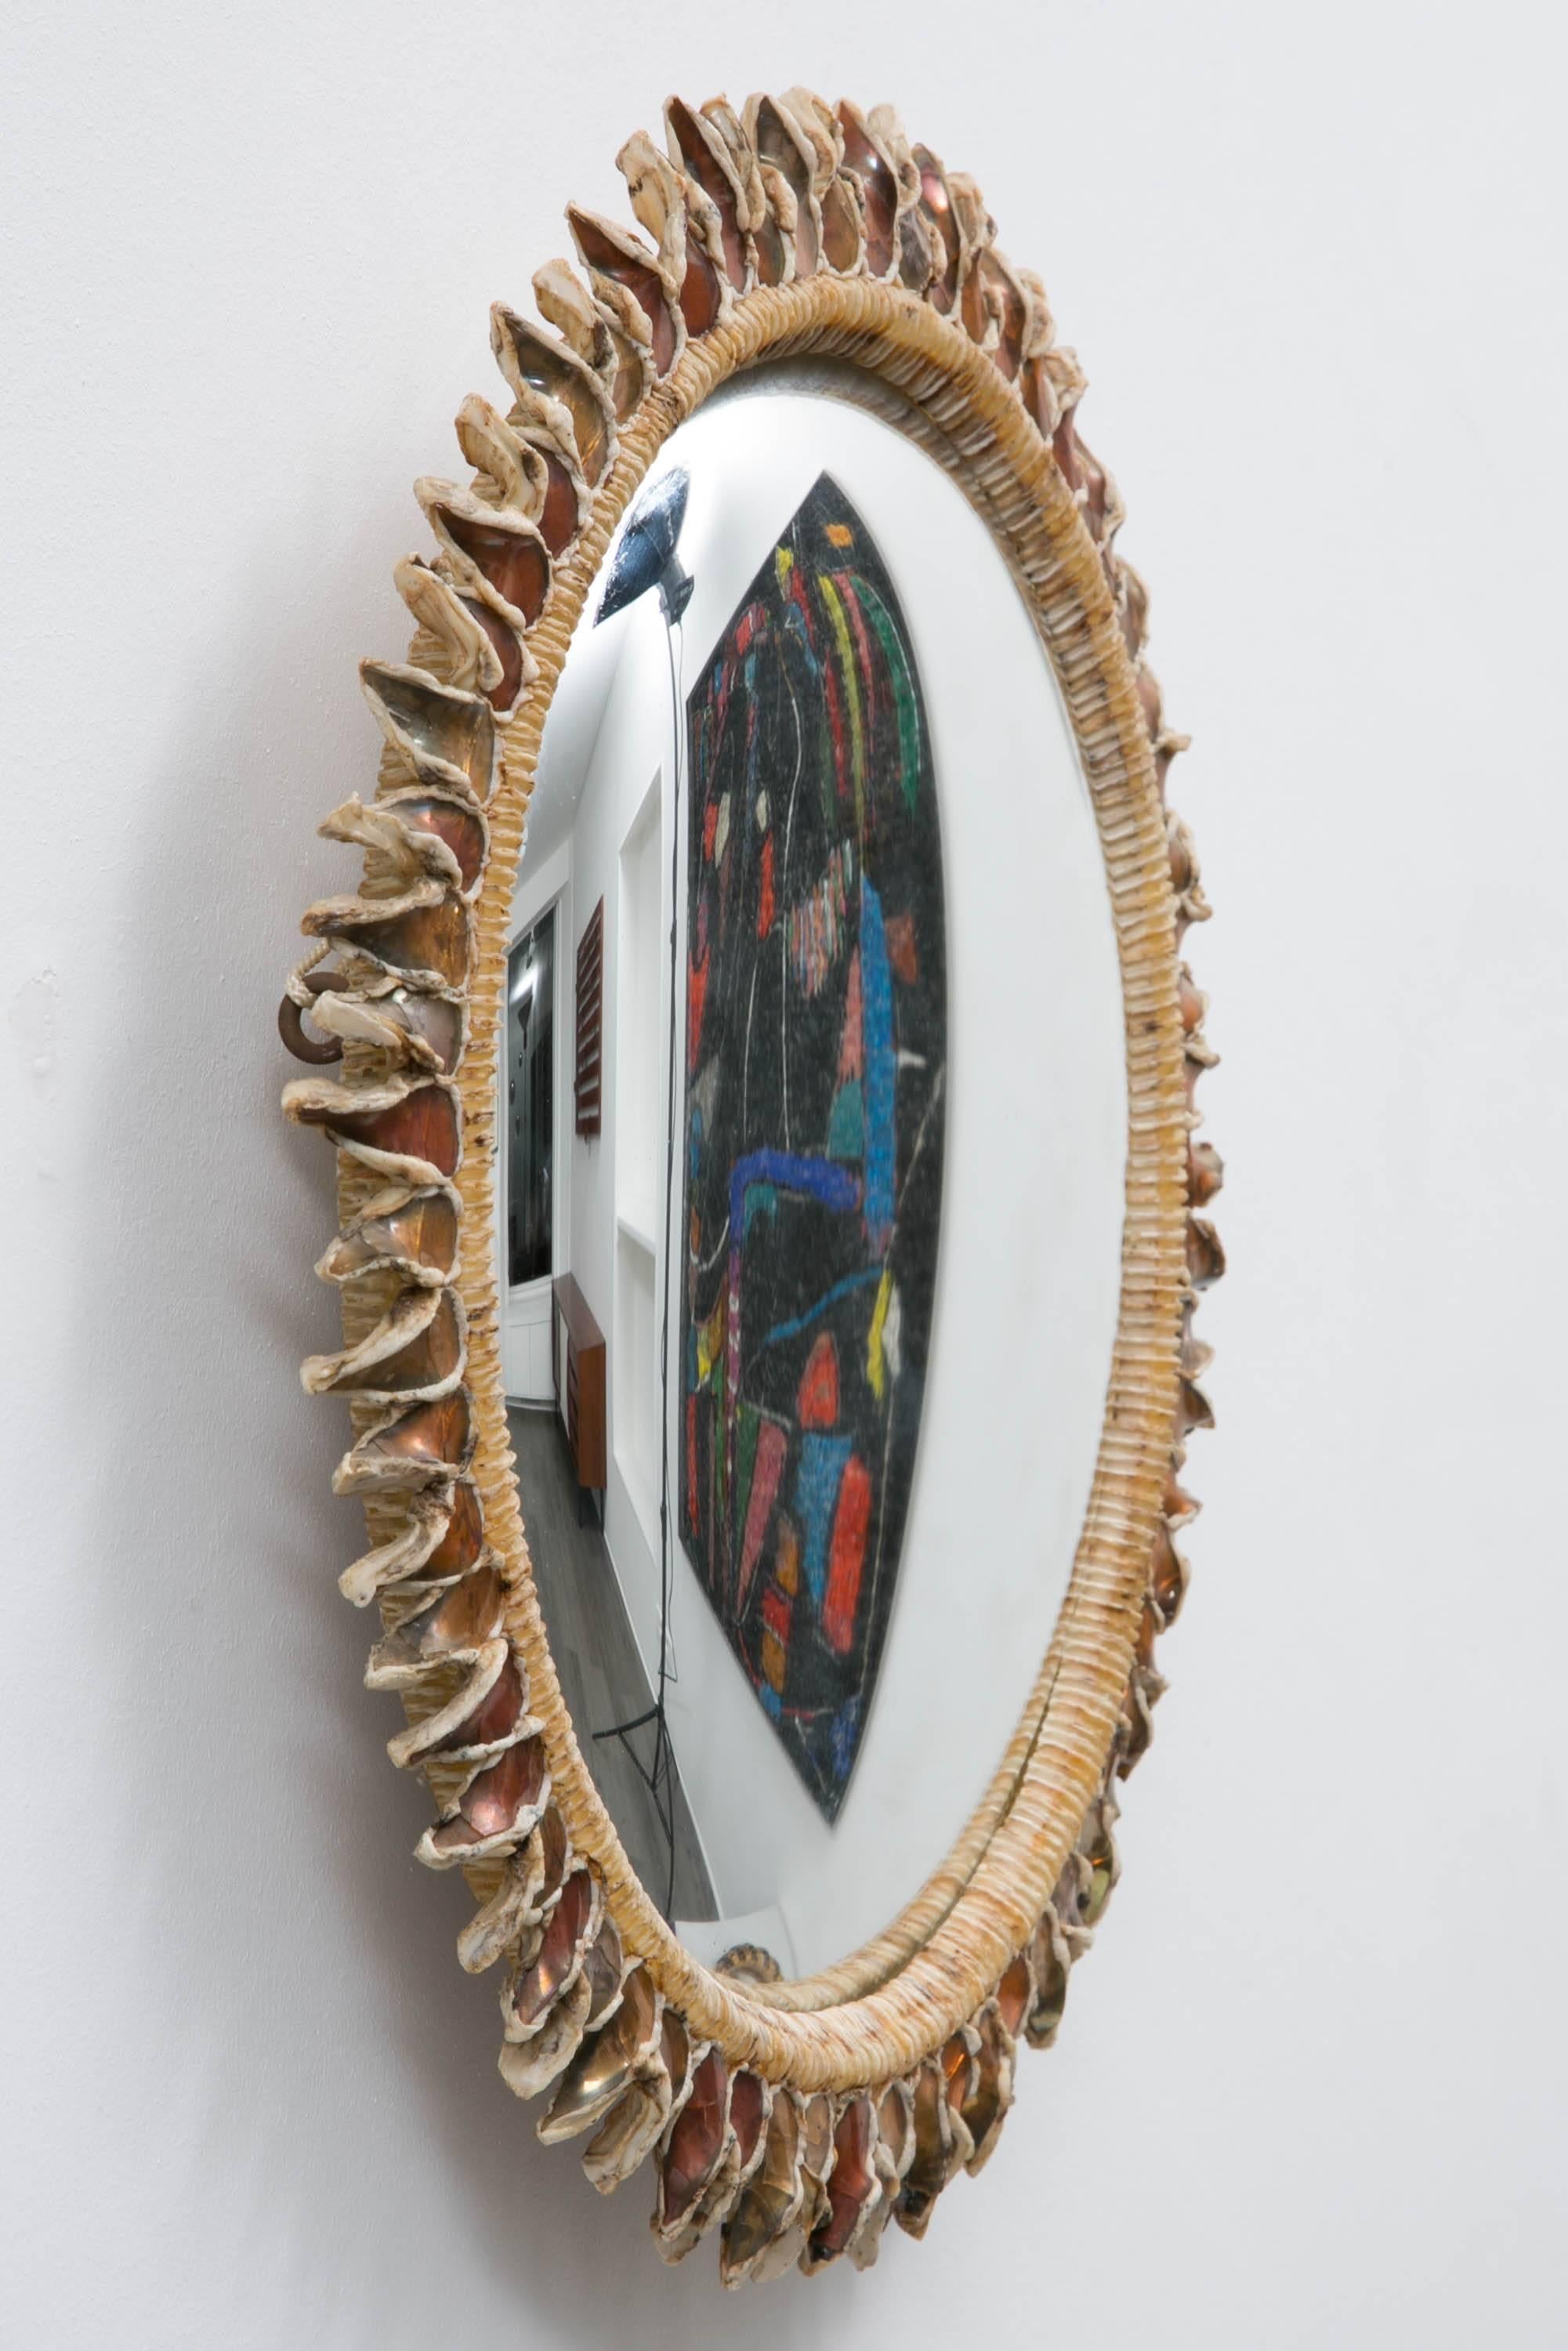 Talosel witch mirror incrusted with orange opalescent mirrors.
Provenance: Private collection, France.
Signed 